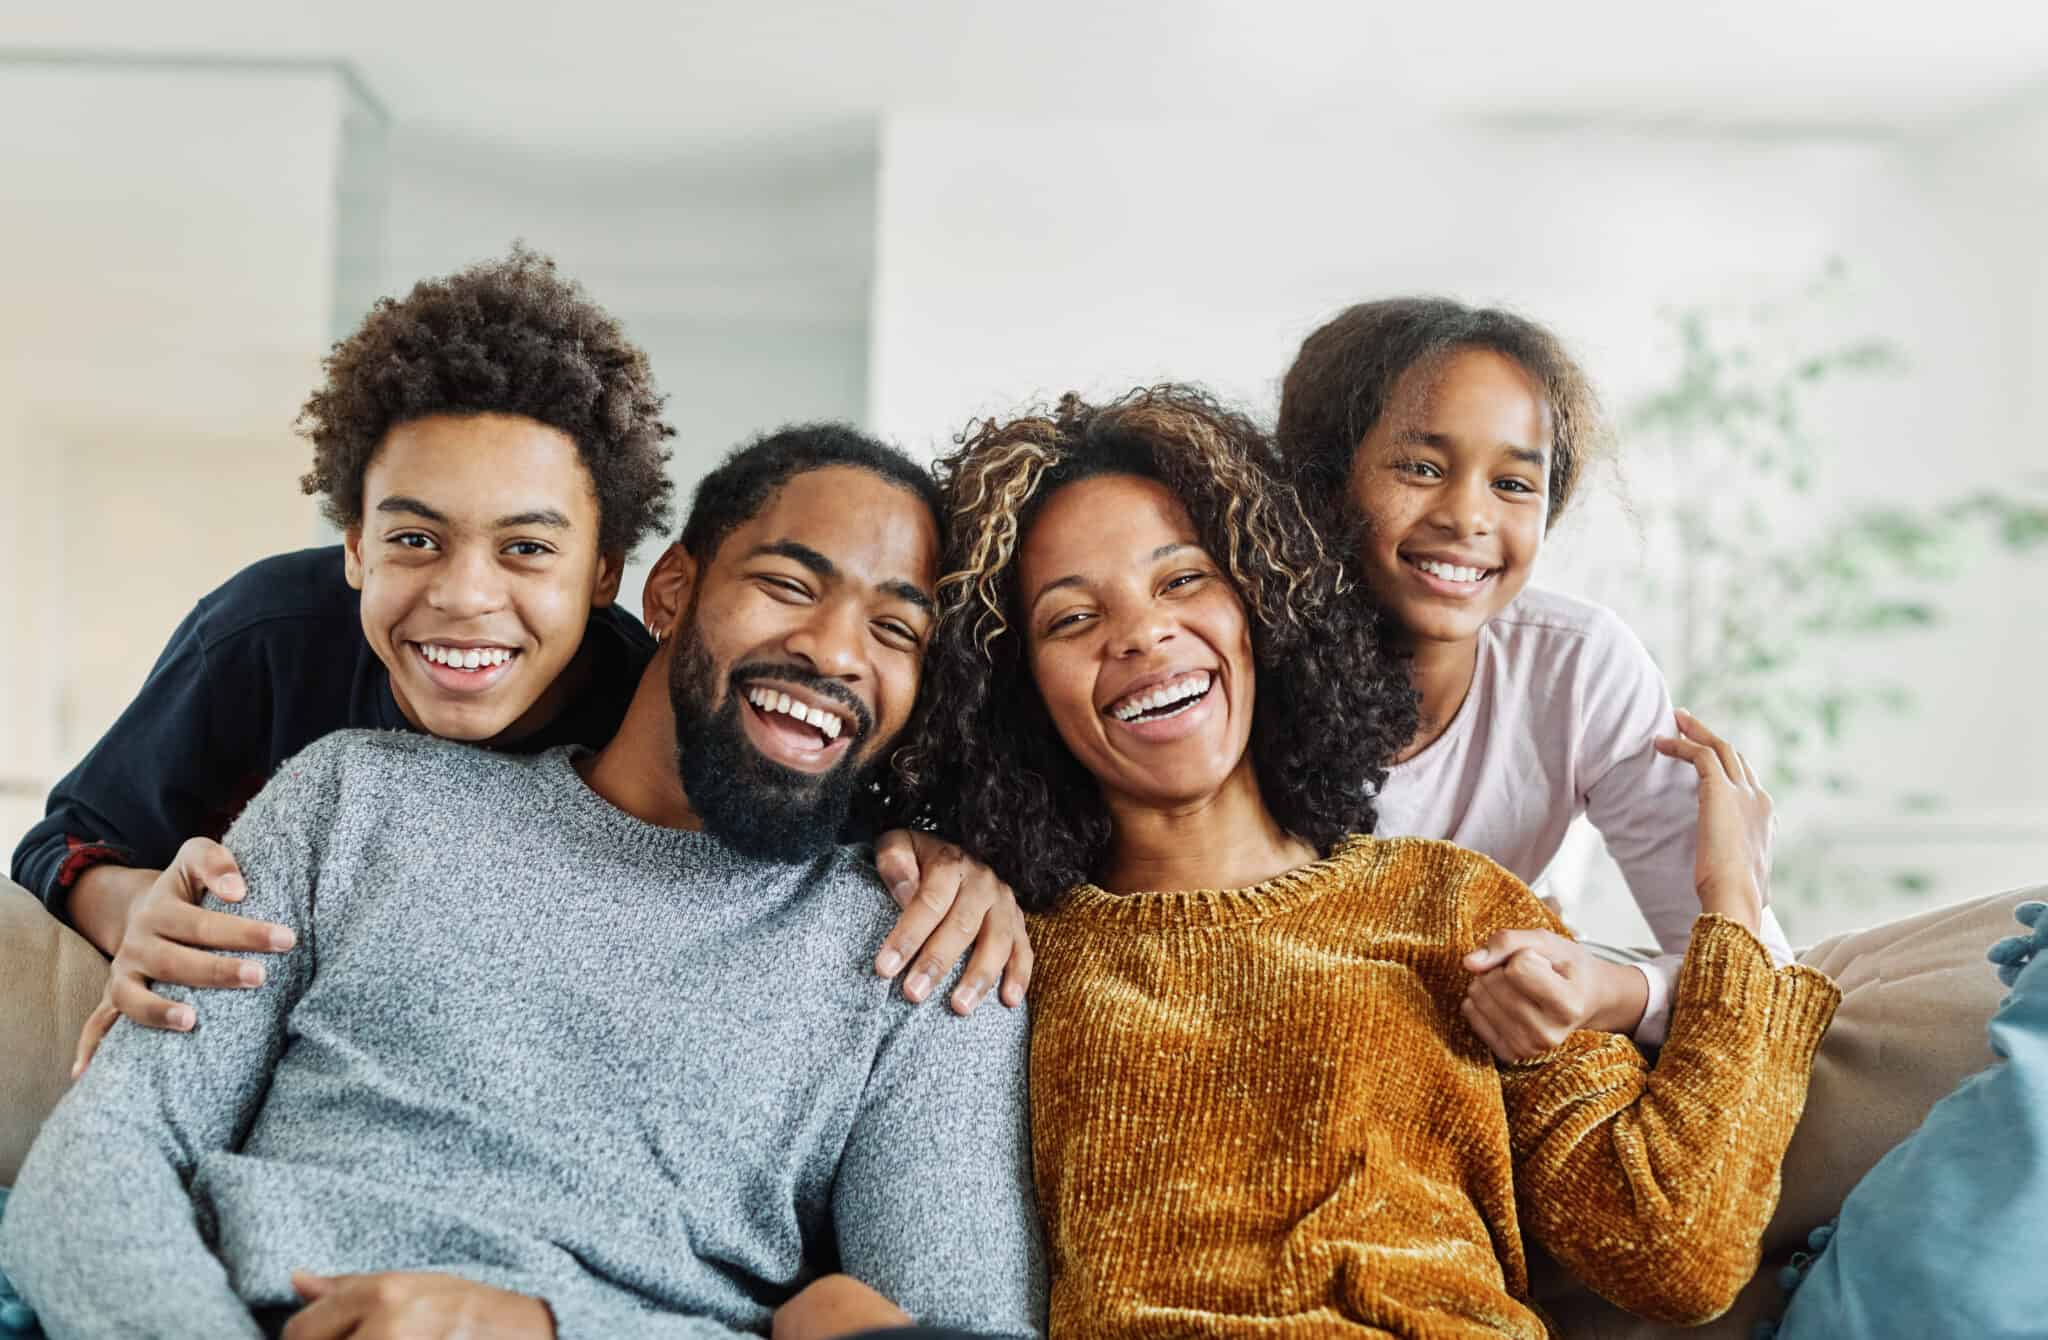 Black family on the couch smiling together.